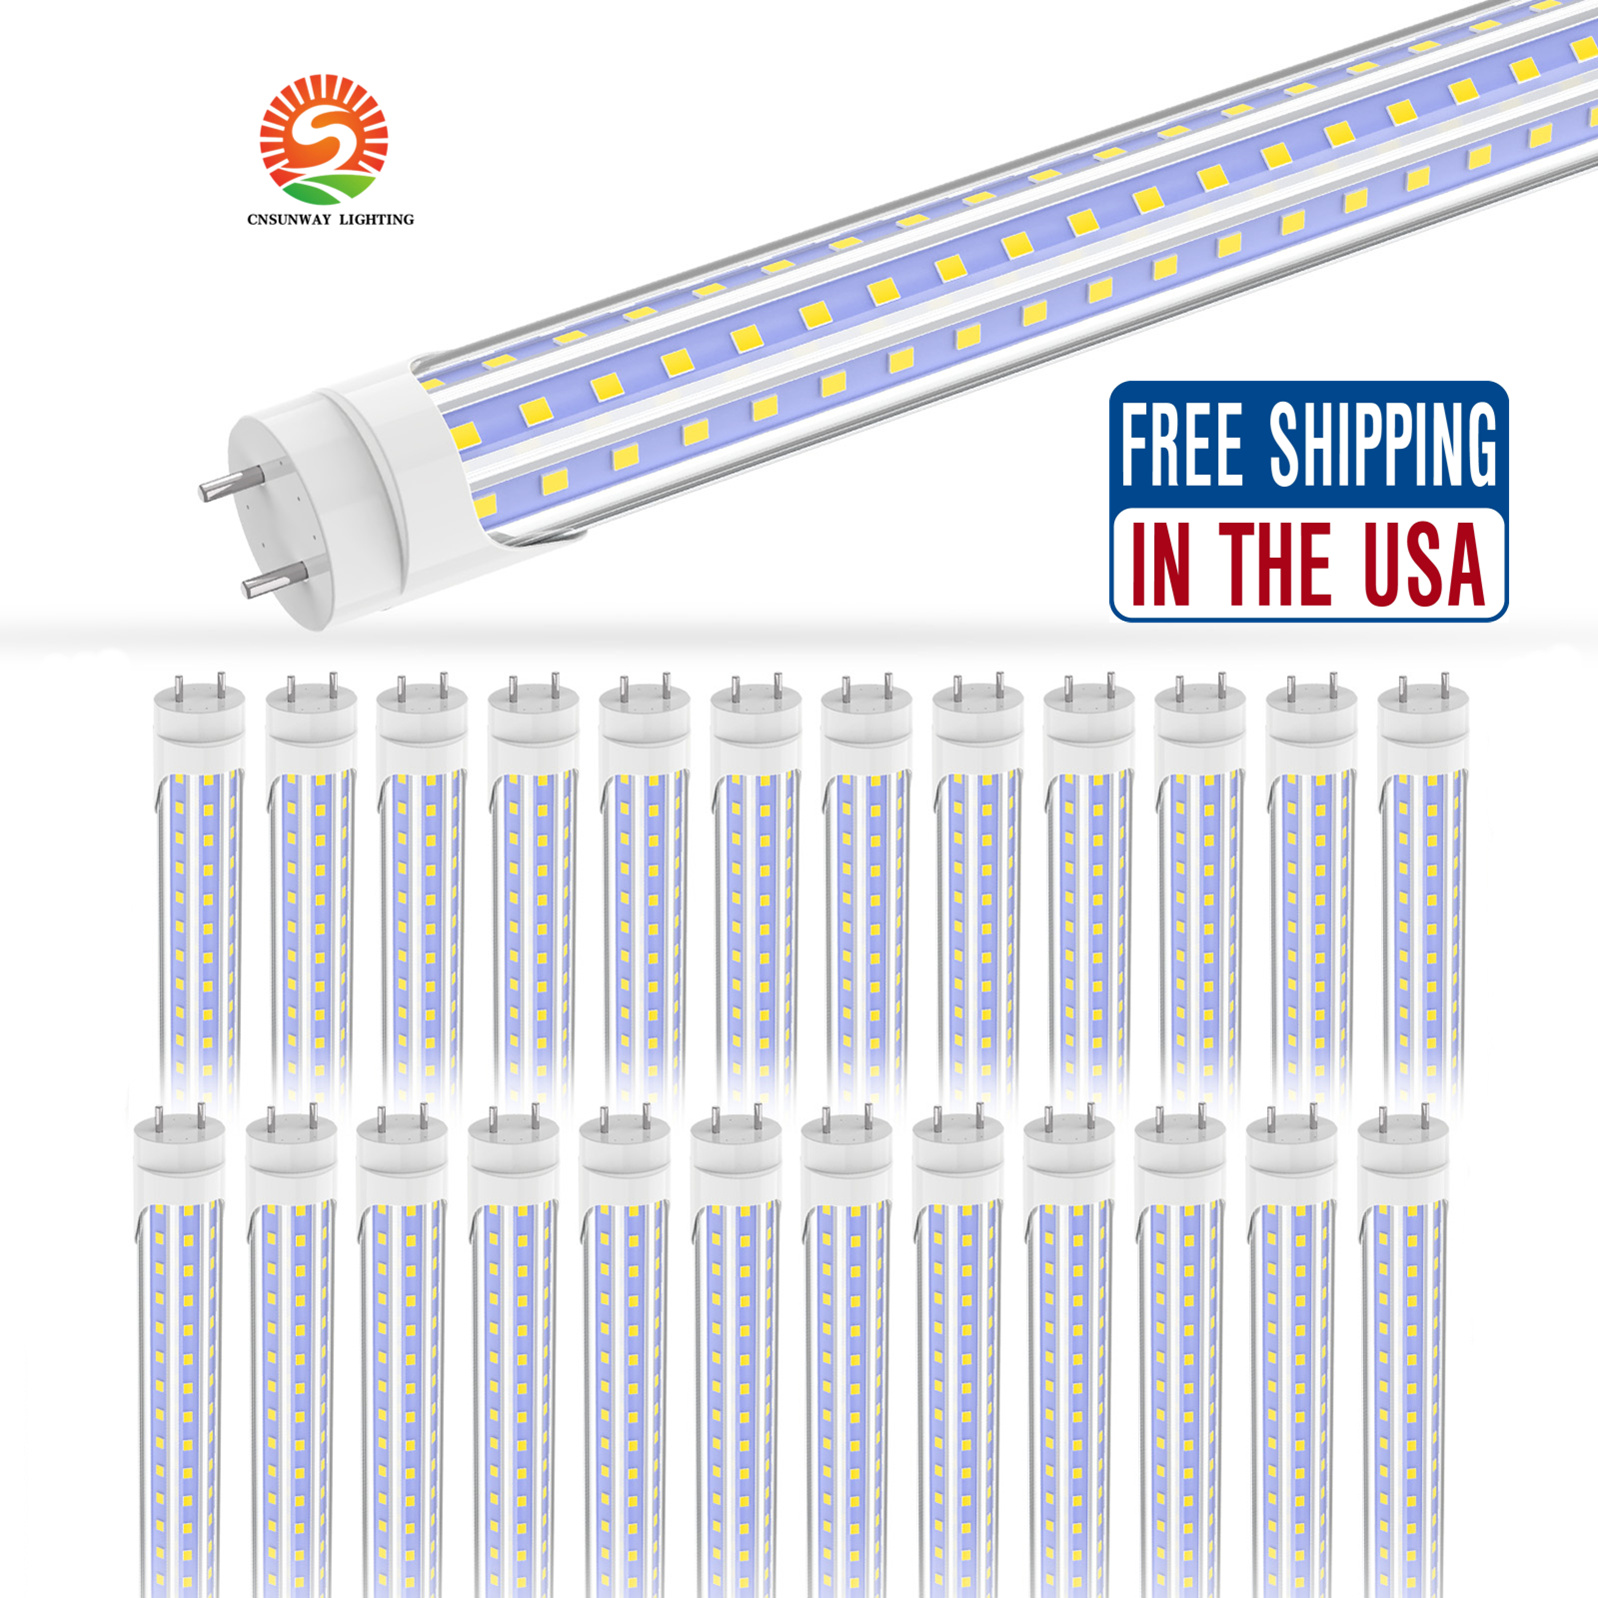 4 Ft LED Light Tubes 36W 2 Pin G13 Base Cool White 6000K Clear Cover 3600 Lumen T8 Ballast Bypass Required Dual-End Powered 48 Inch T8 SHOPLED shop garage warehouse